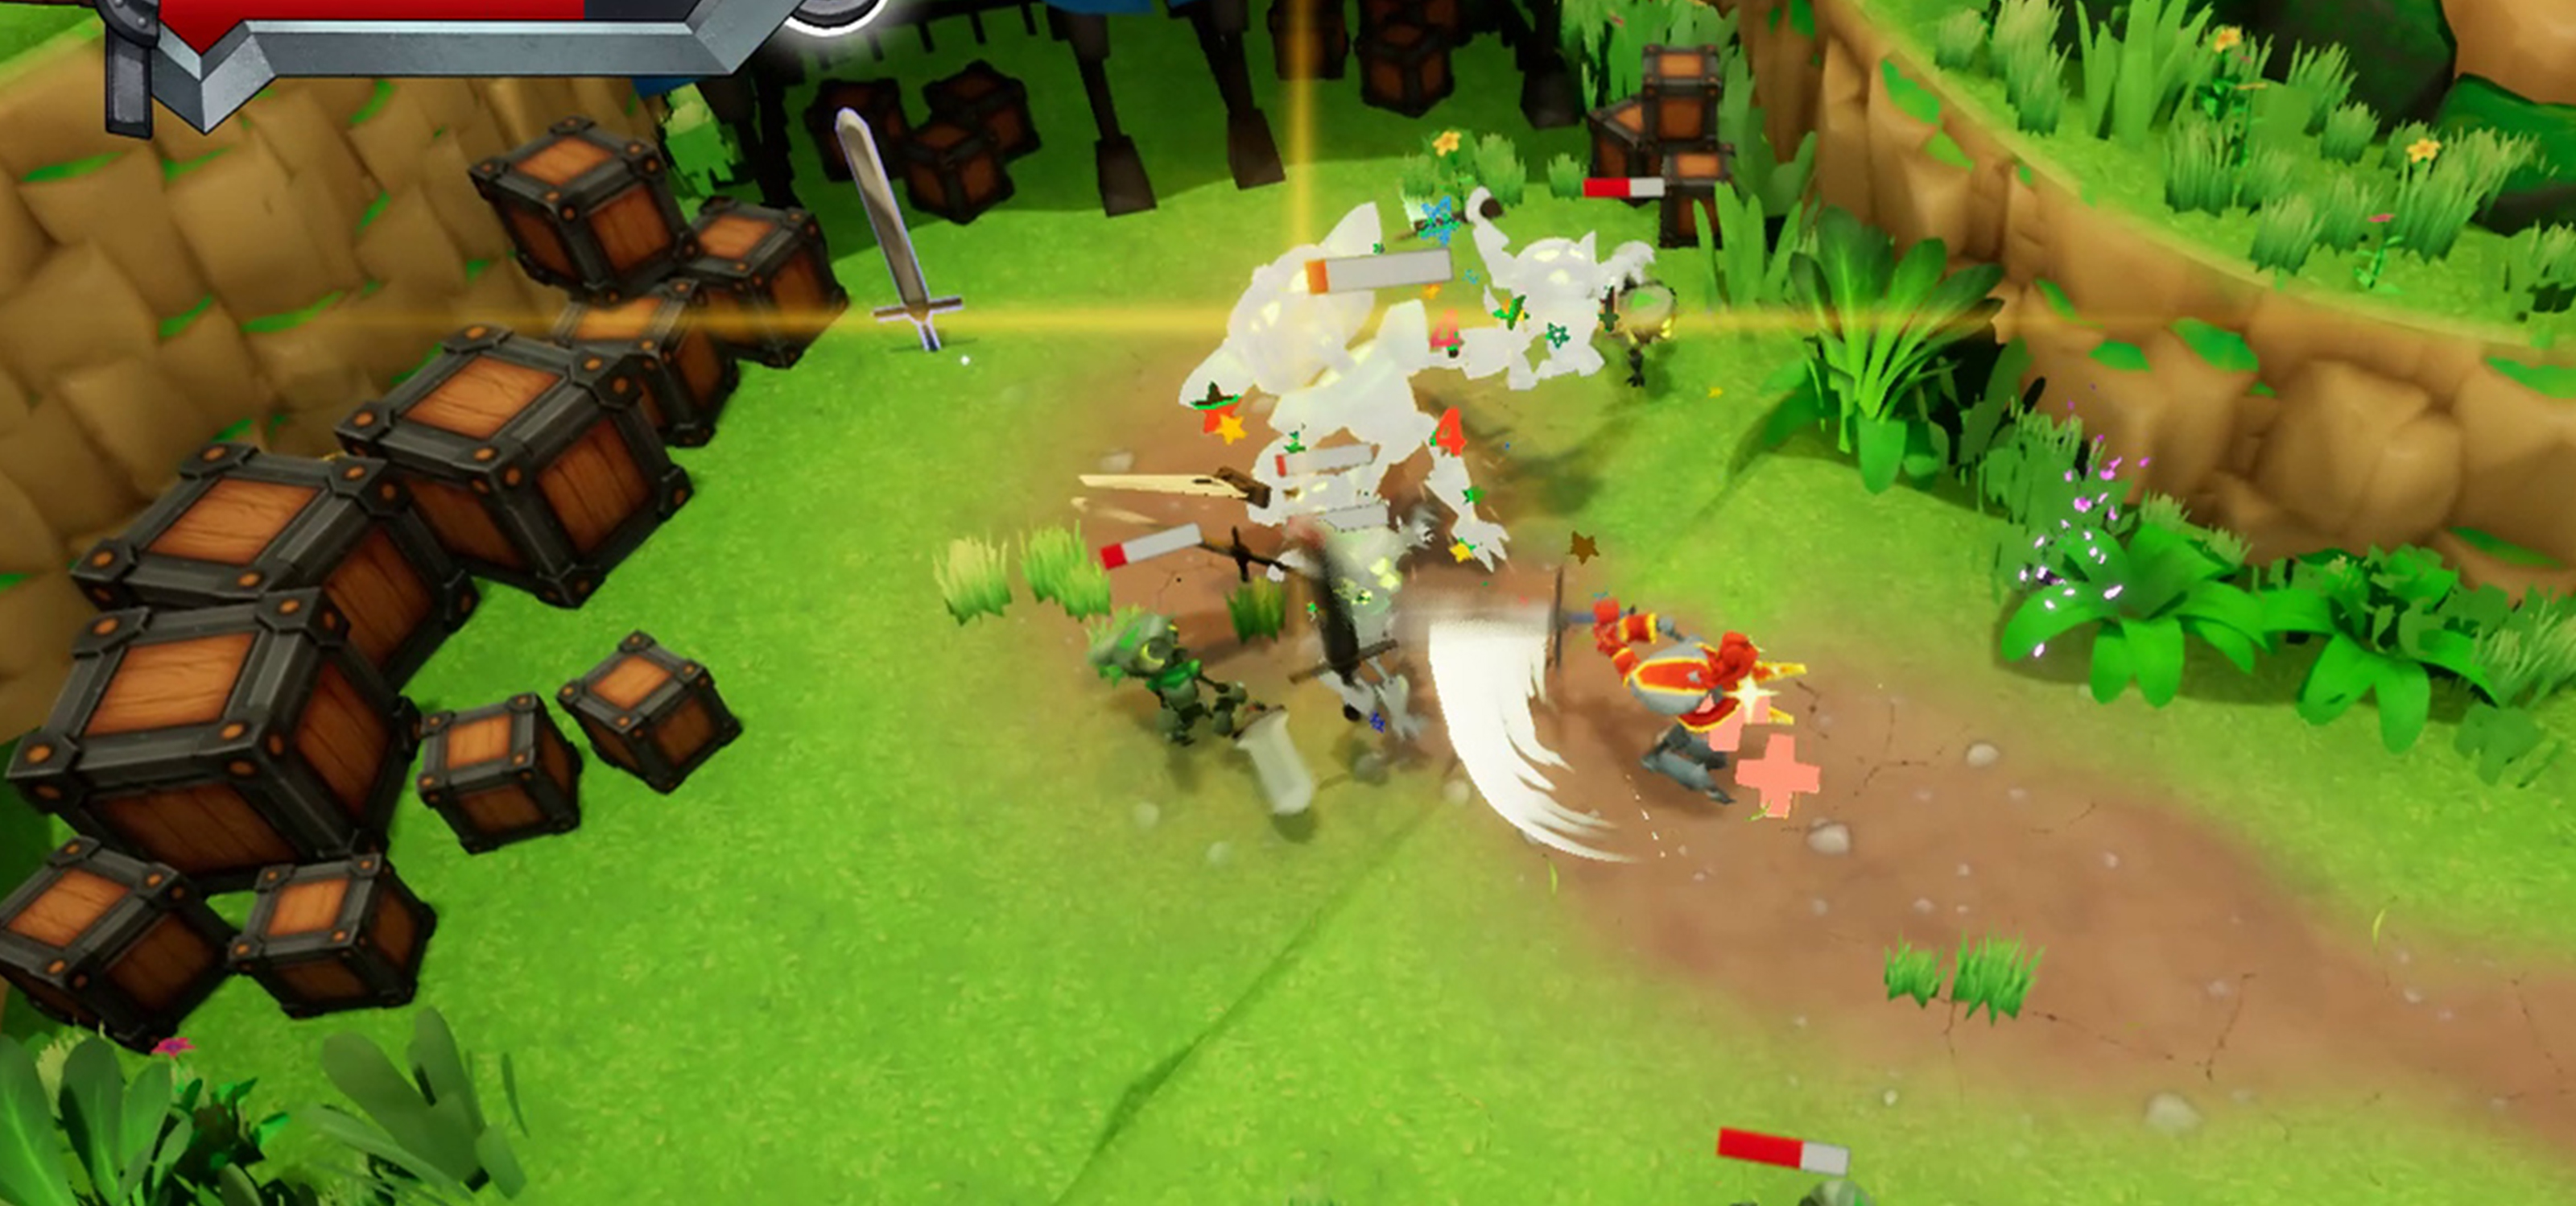 A knight swipes at enemies in DigiPen student game Excalibots